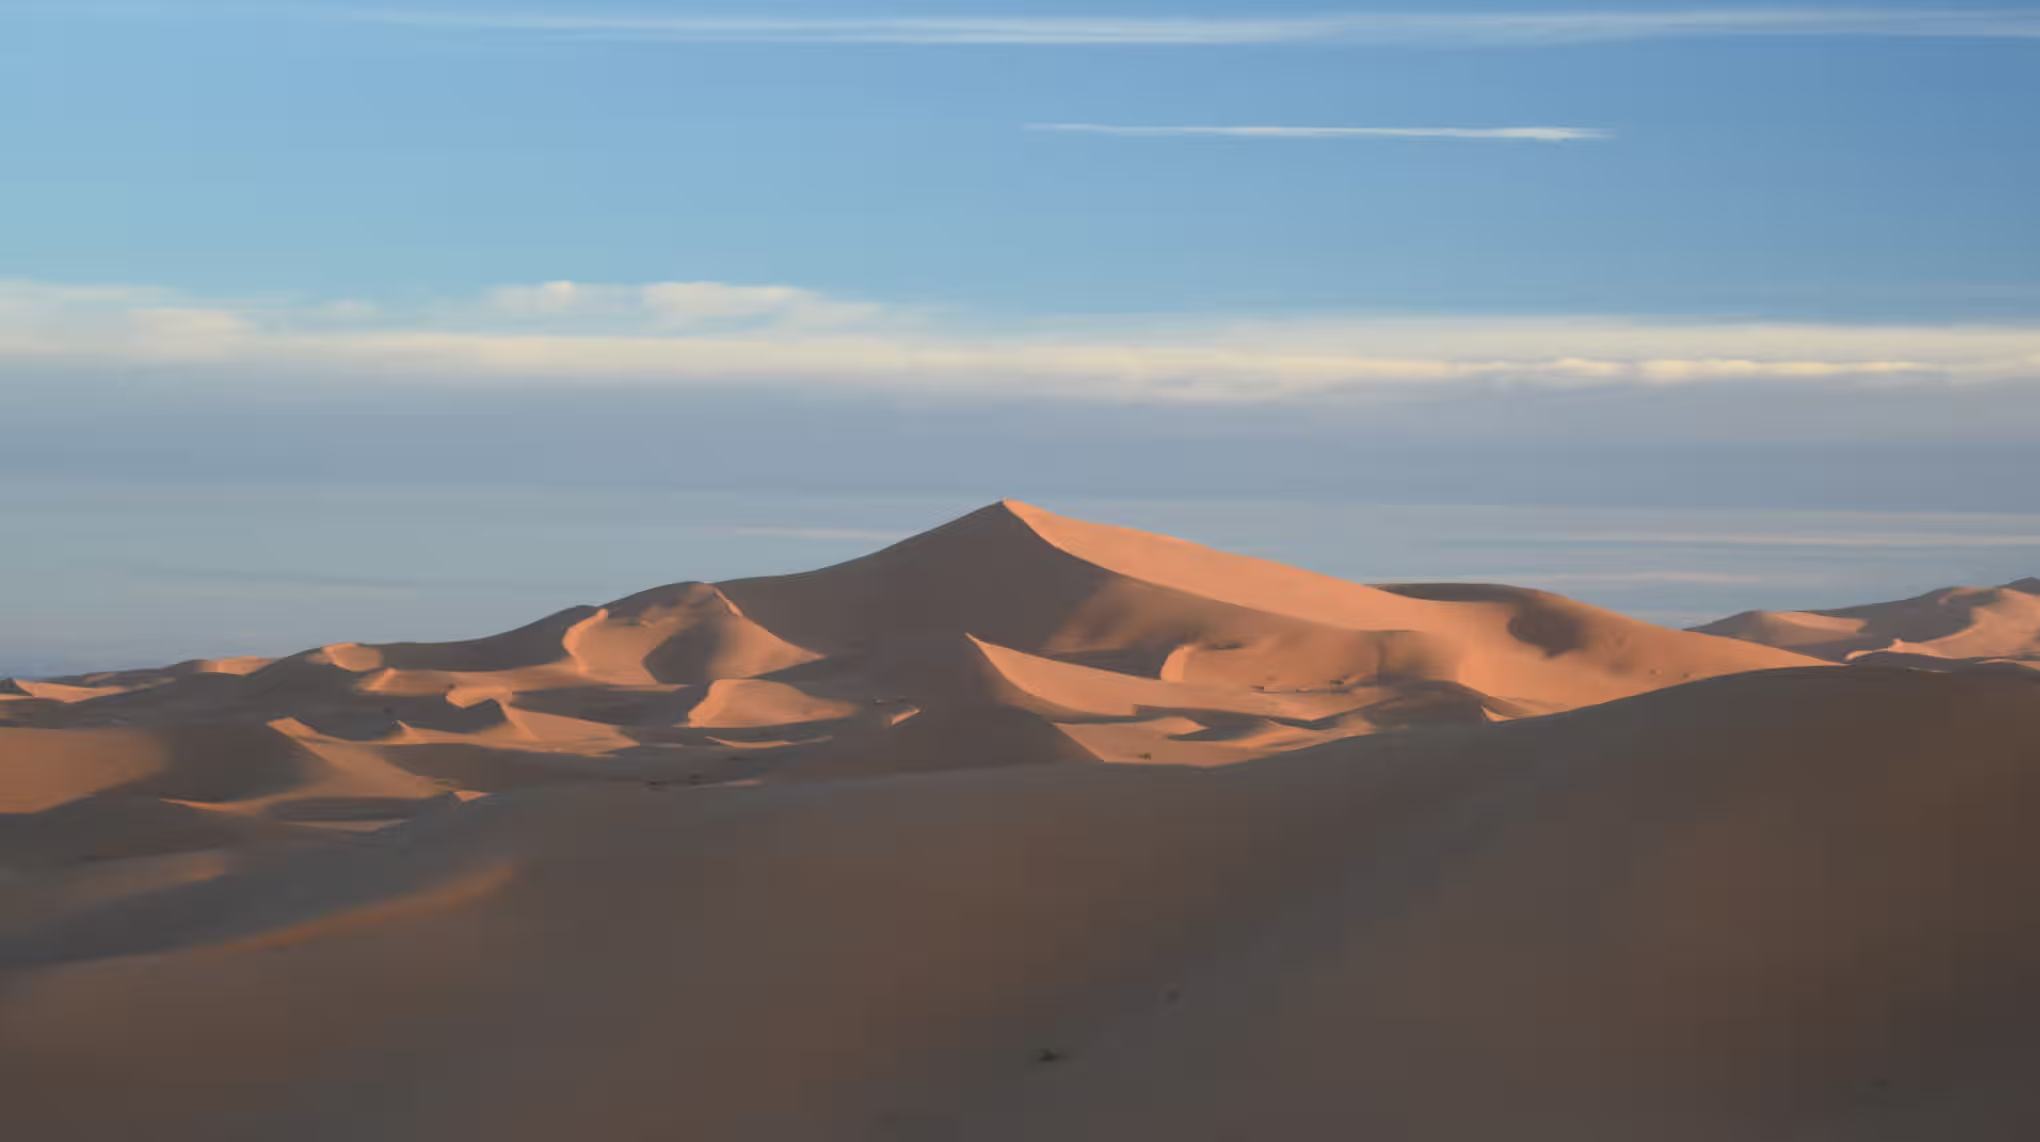 scientists have determined the age of the Lala Lallia star dune